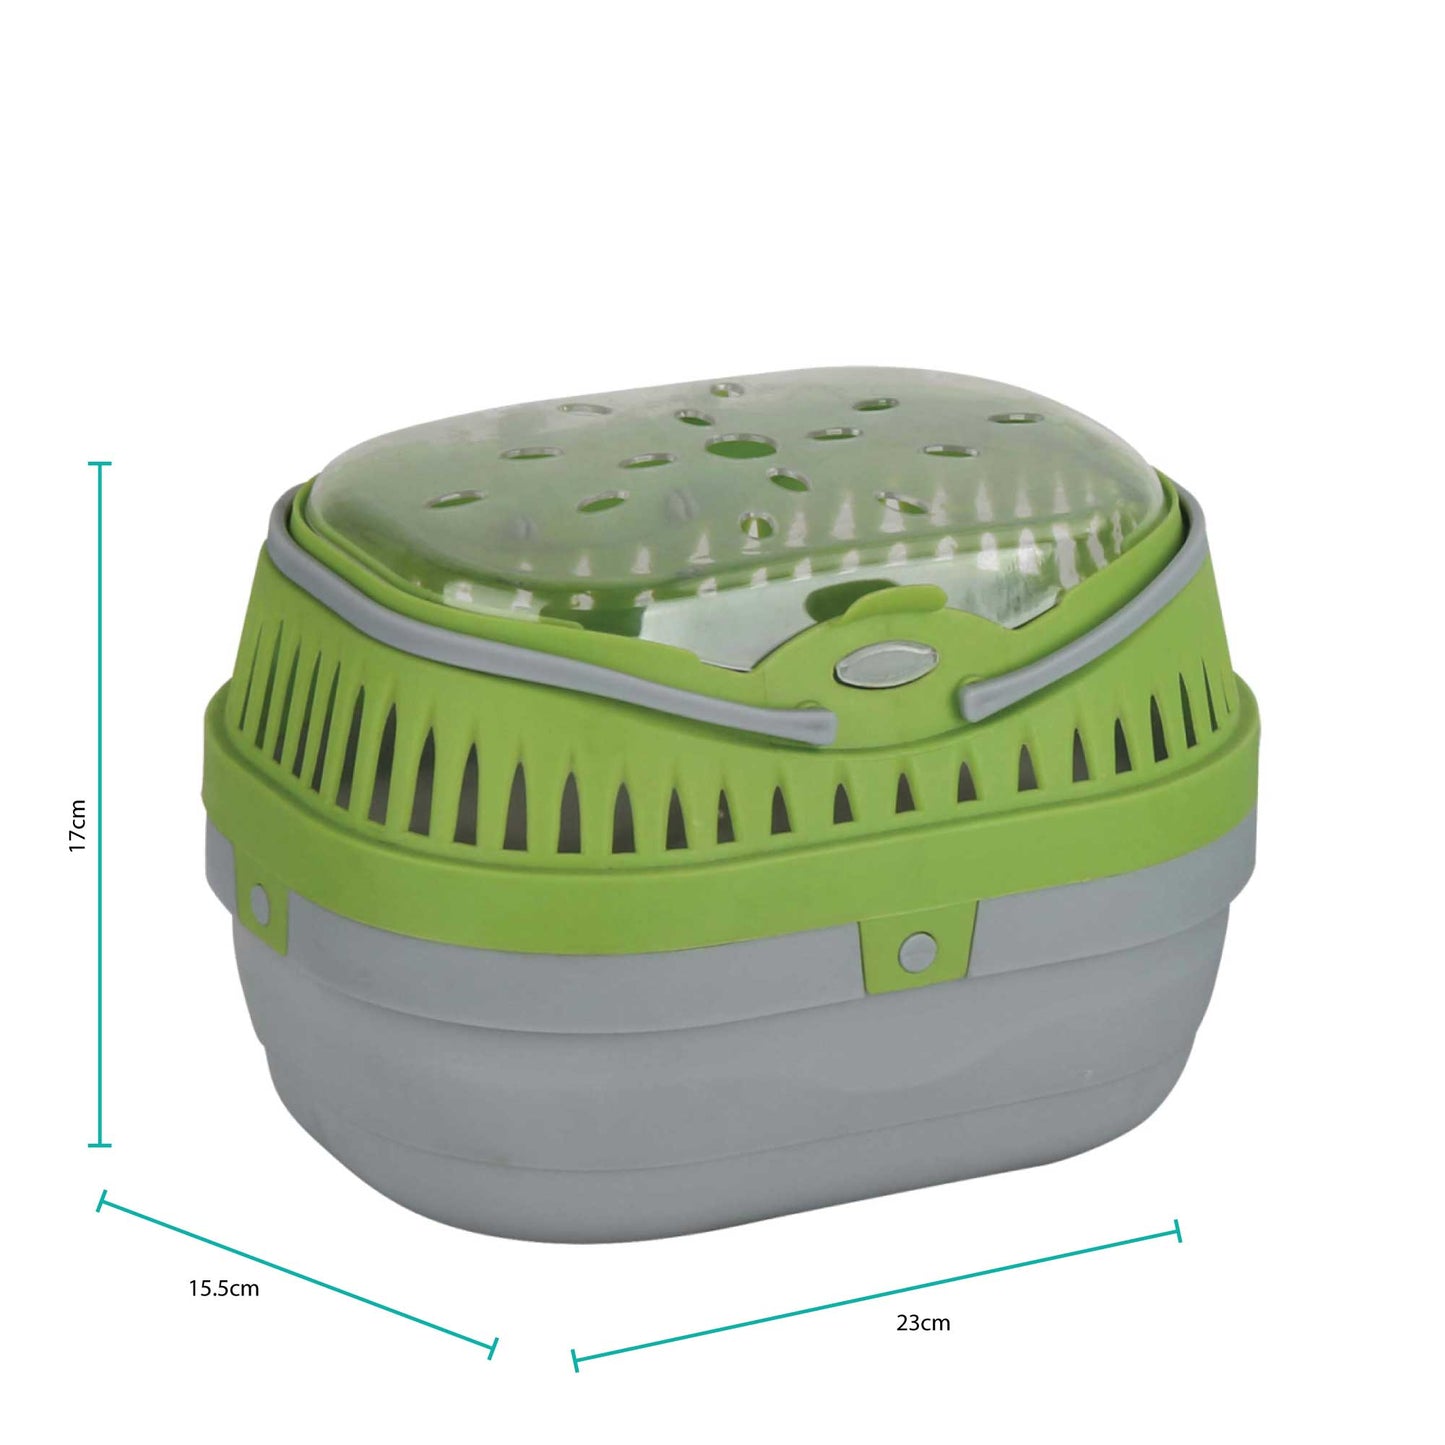 Small Pet Carrier Green Plastic Guinea Pig Mouse Hamster Rat Animal Travel Cage